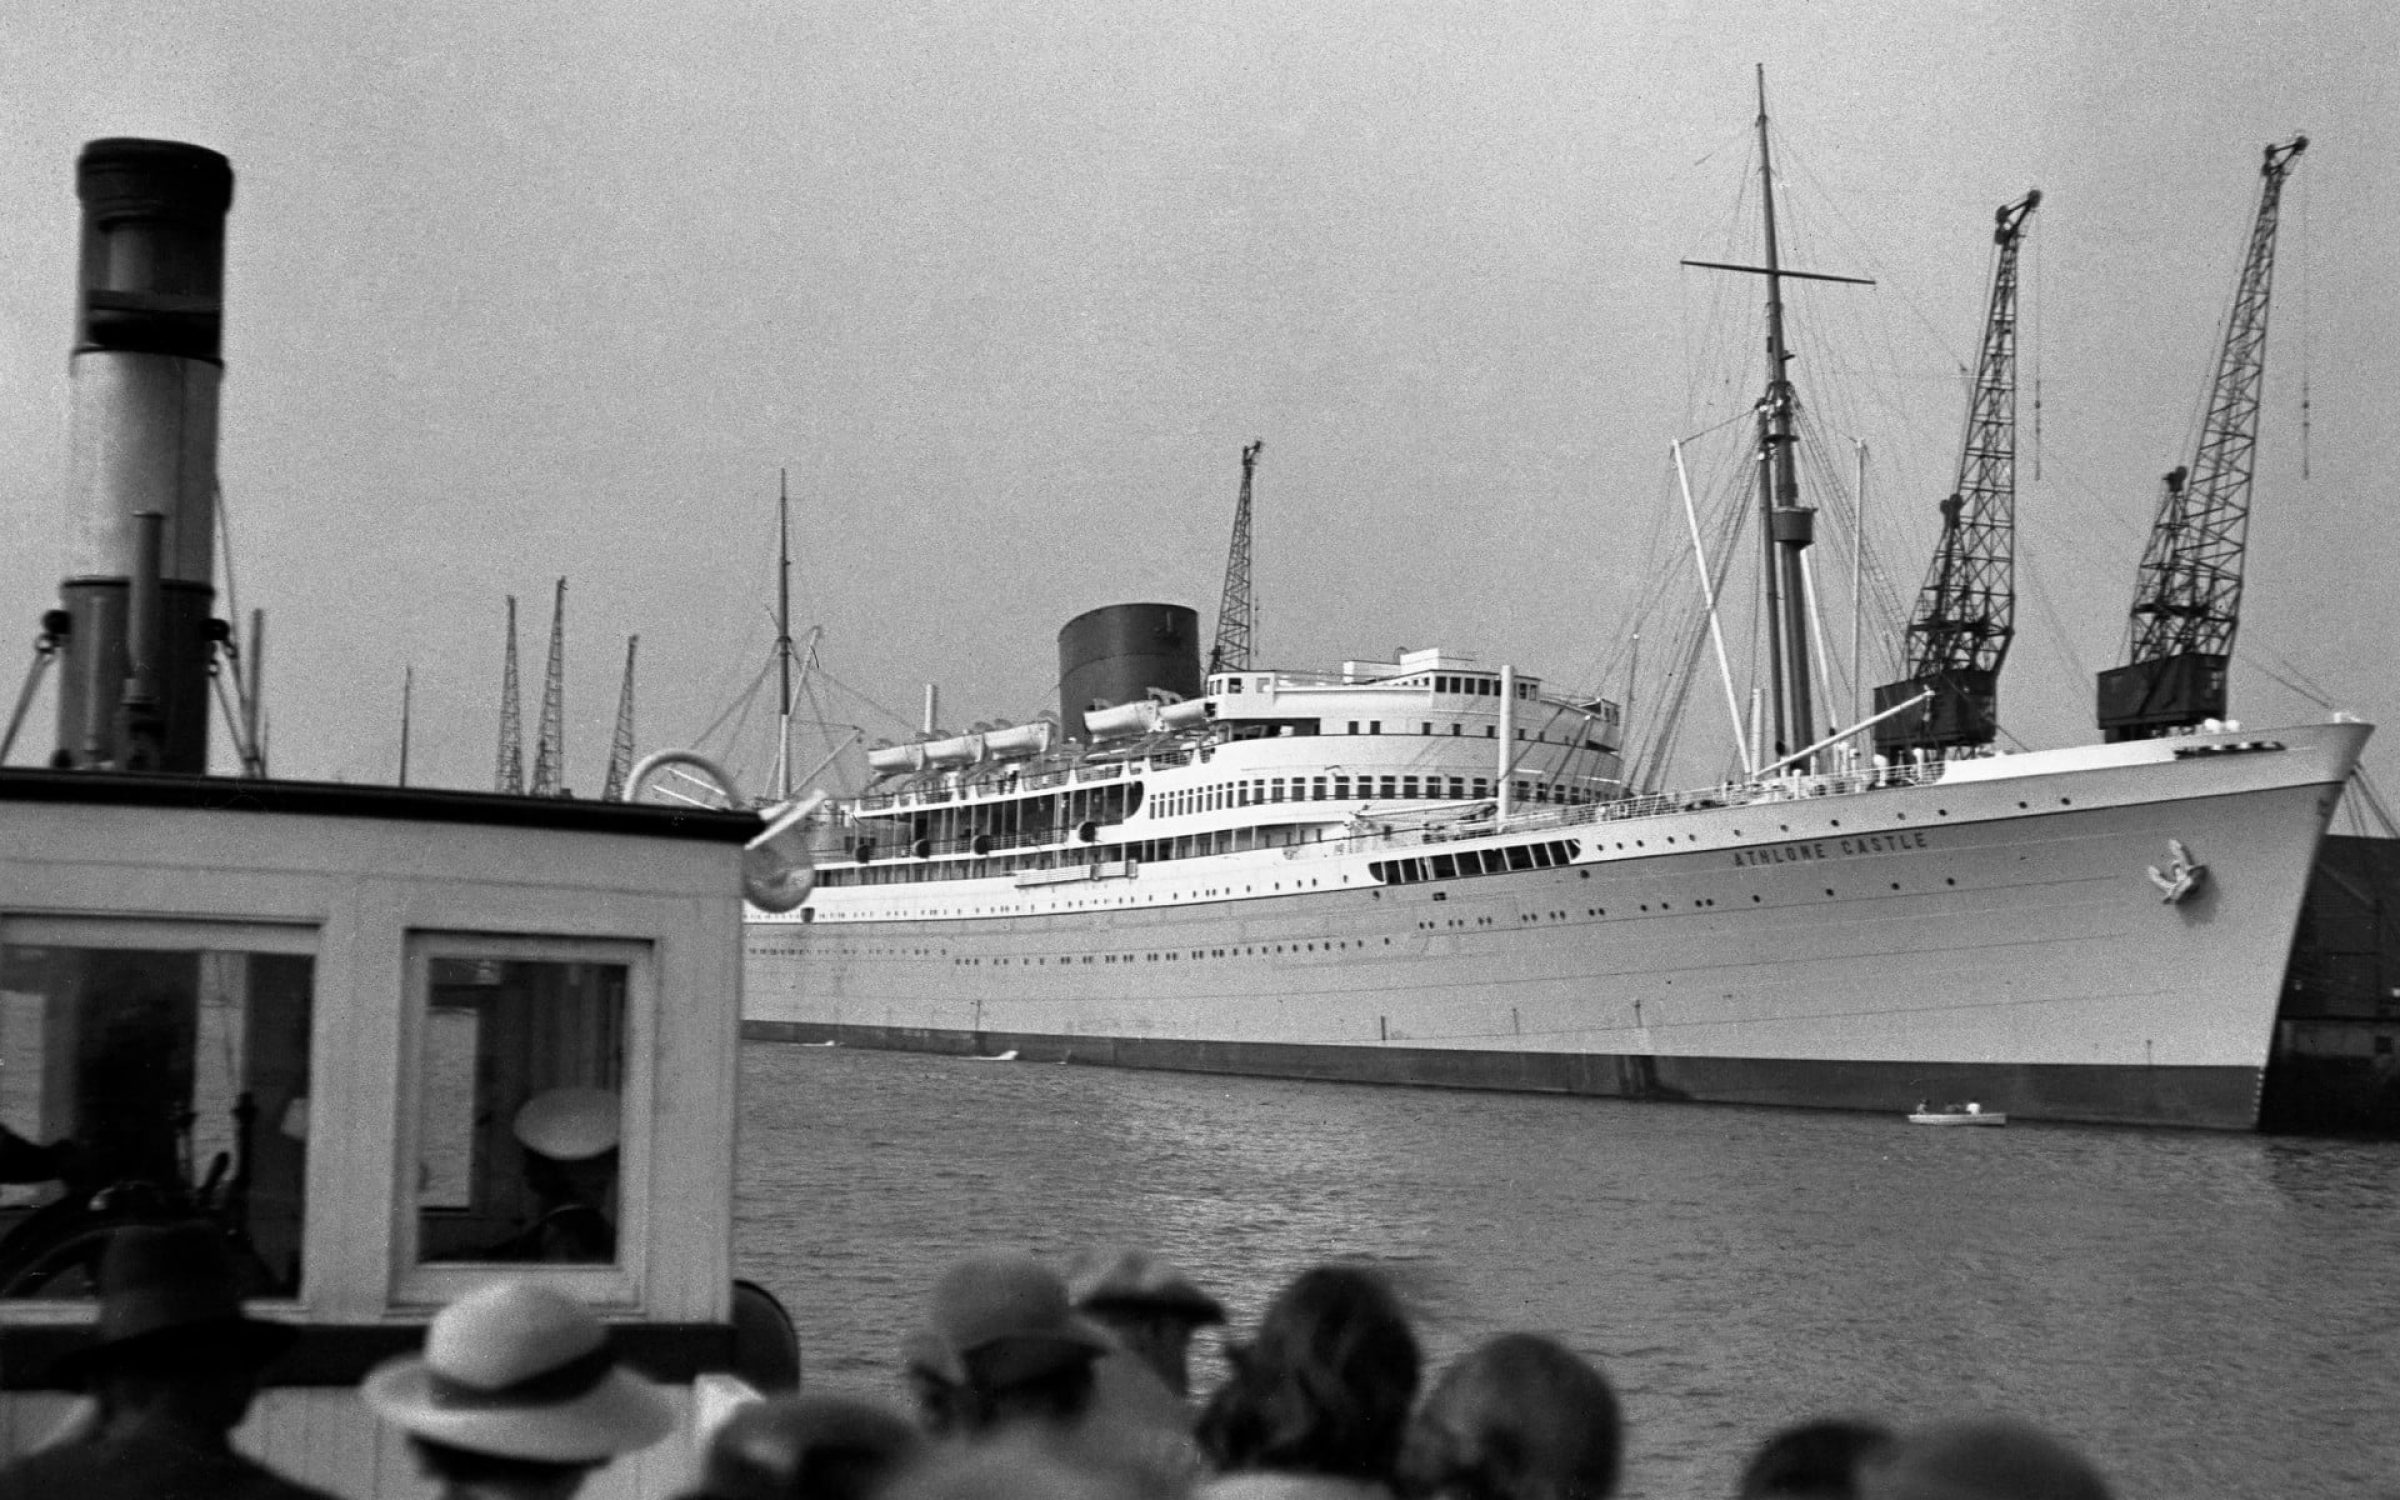 Union Castle liner in Southampton, England, a boat which carried immigrants from South Africa to Britain